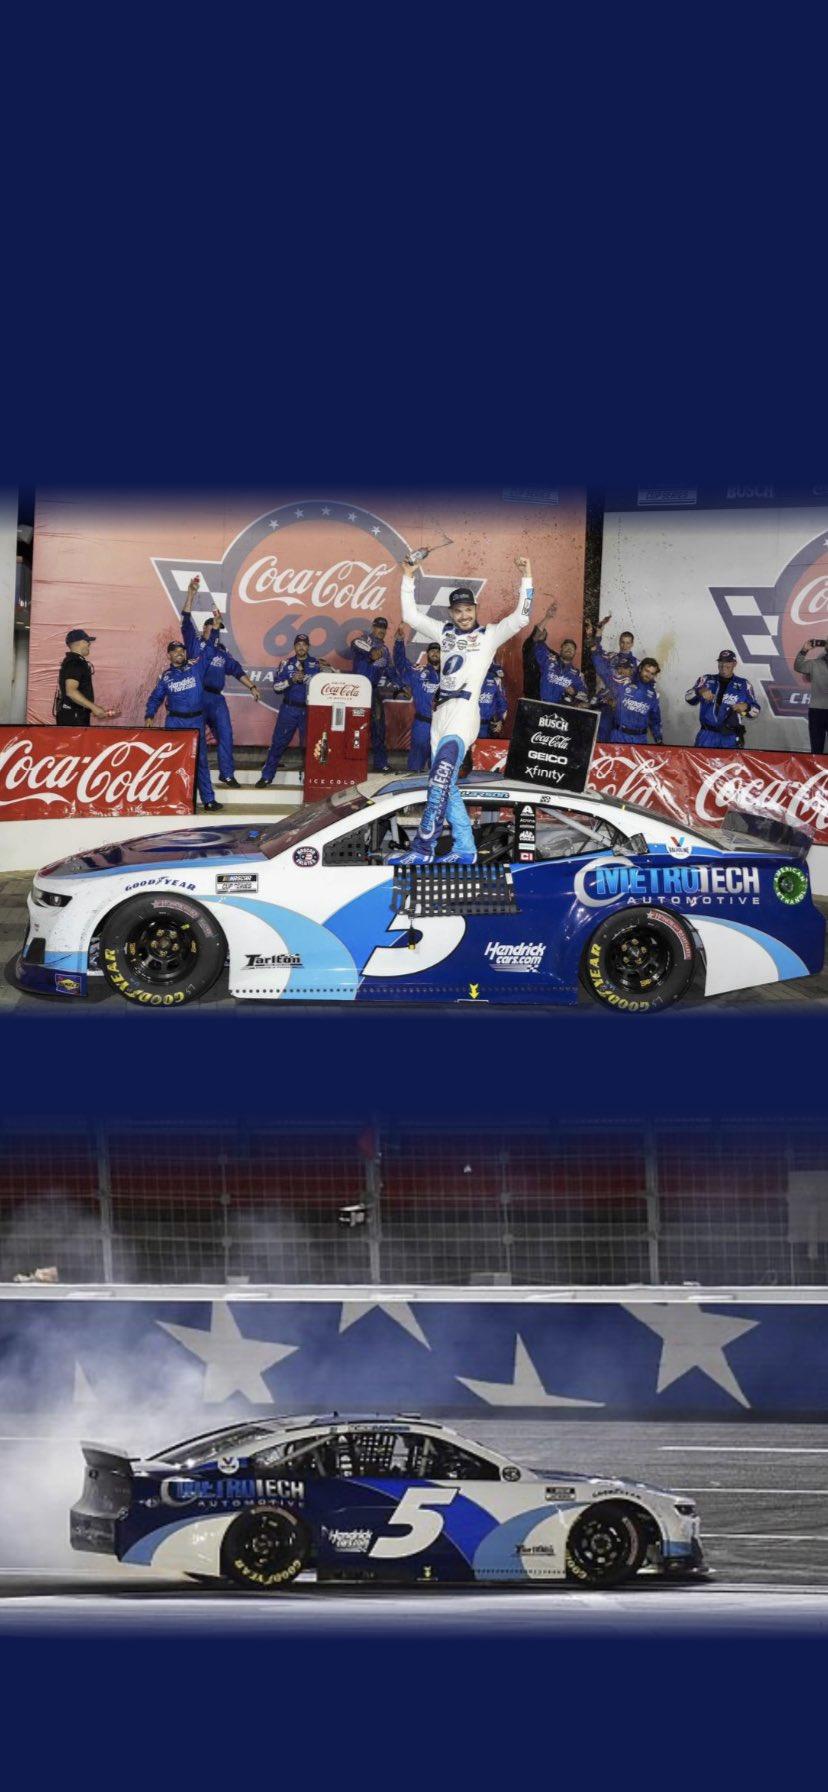 21091 Kyle Larson Nascar Stock Photos HighRes Pictures and Images   Getty Images